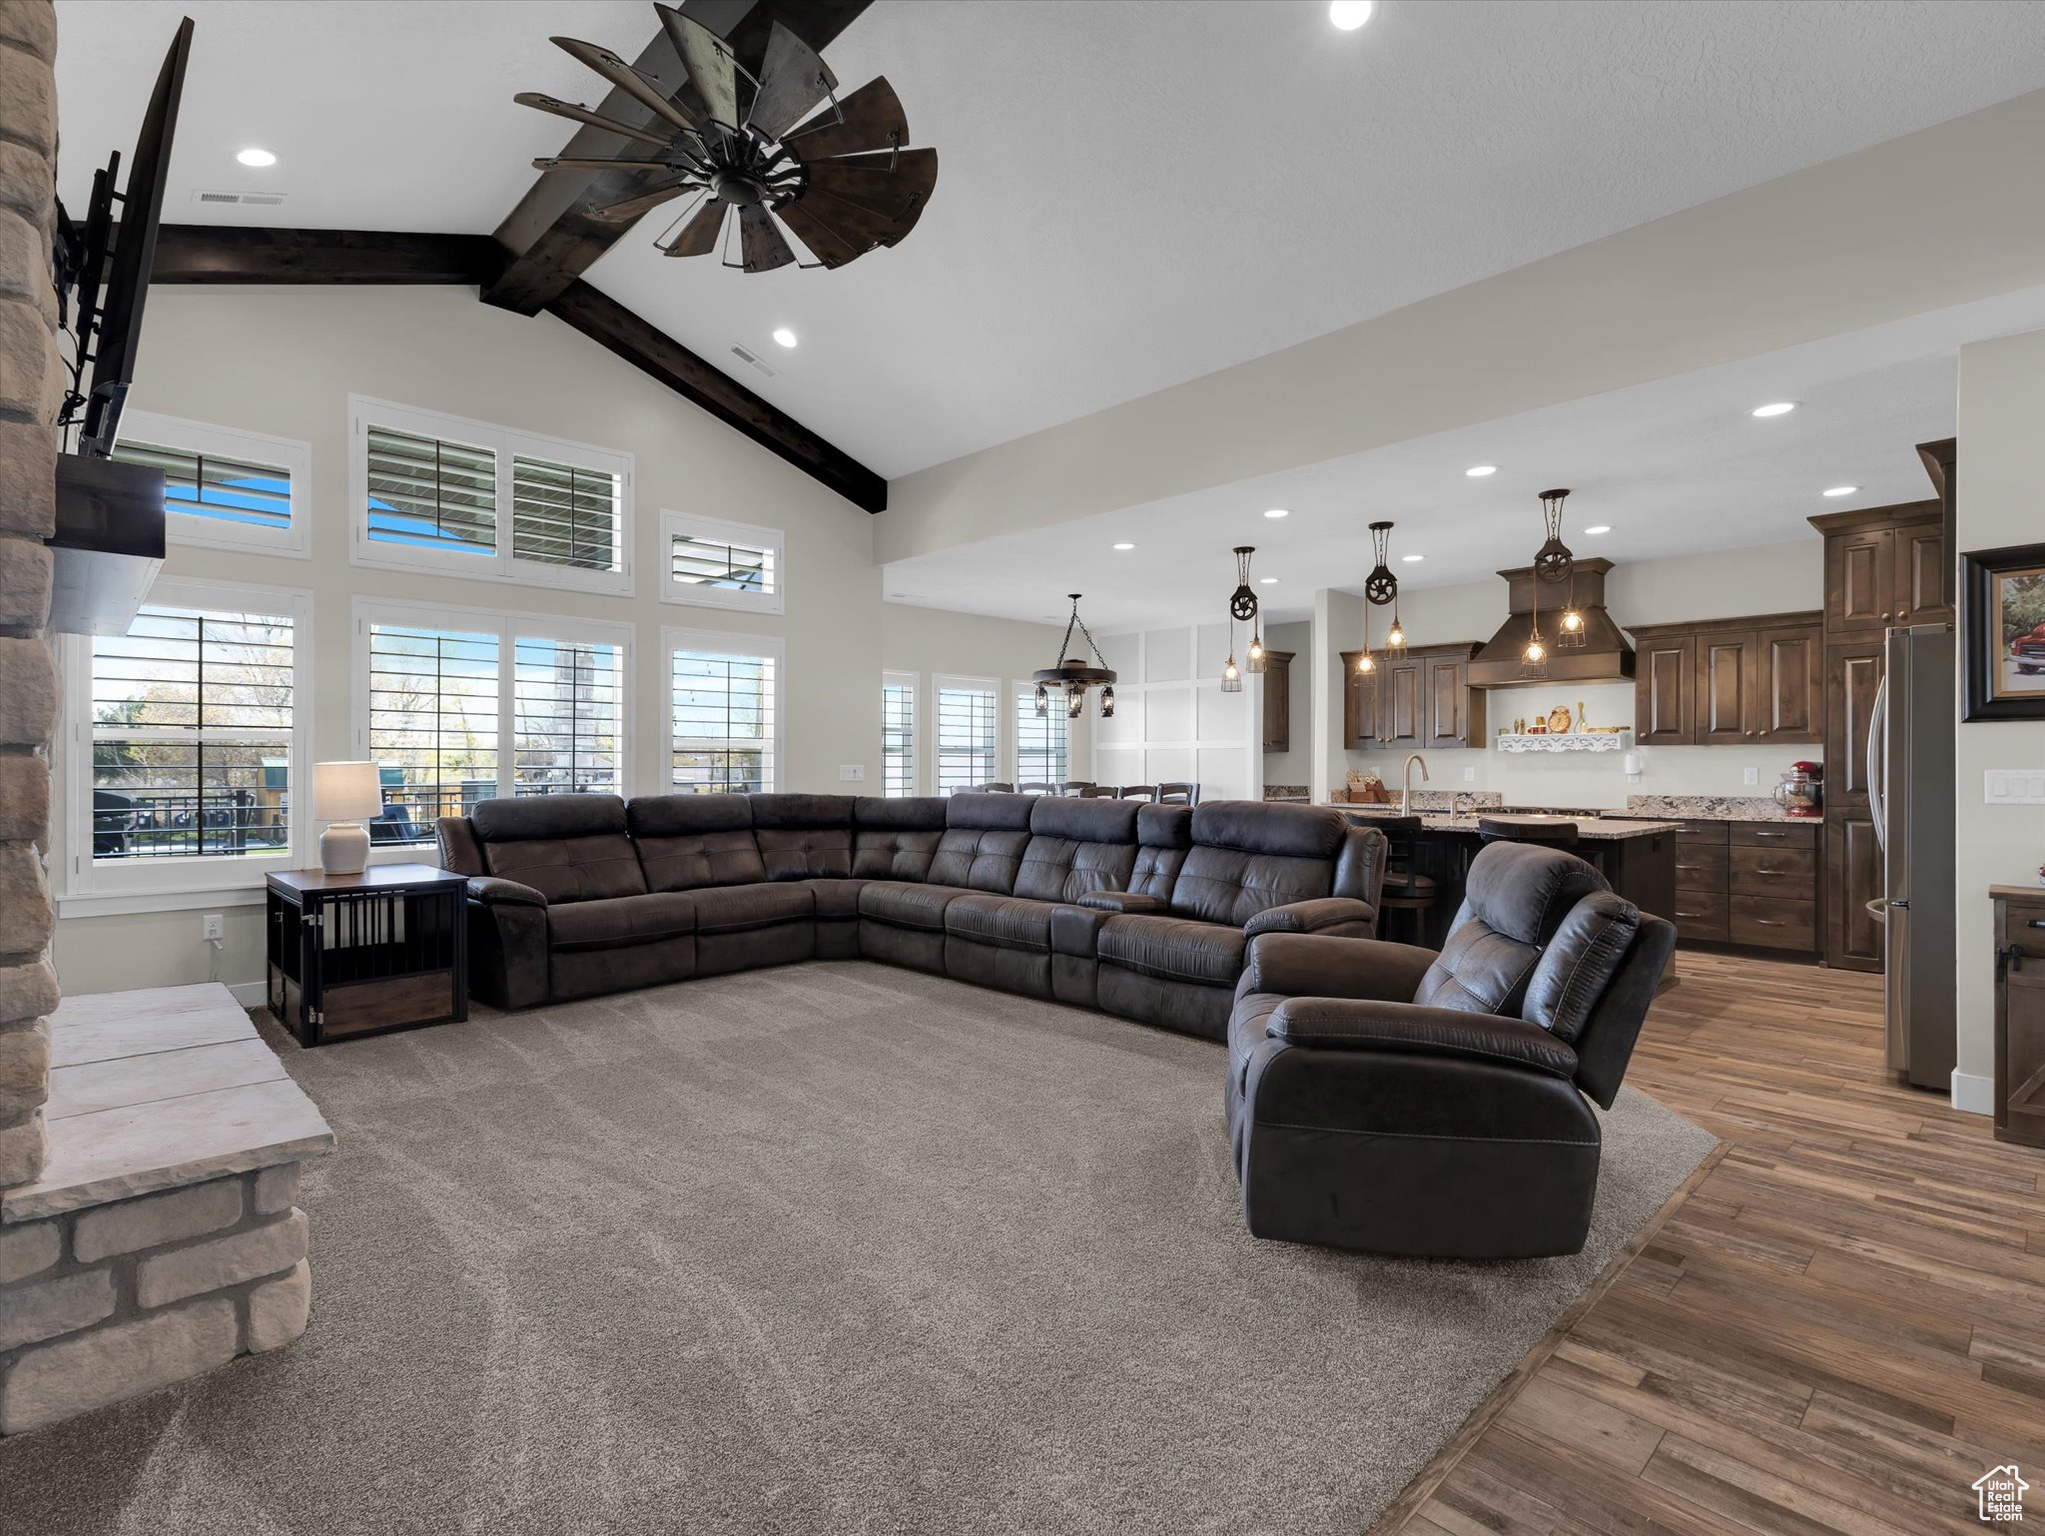 Living room with beamed ceiling, ceiling fan, high vaulted ceiling, and light wood-type flooring